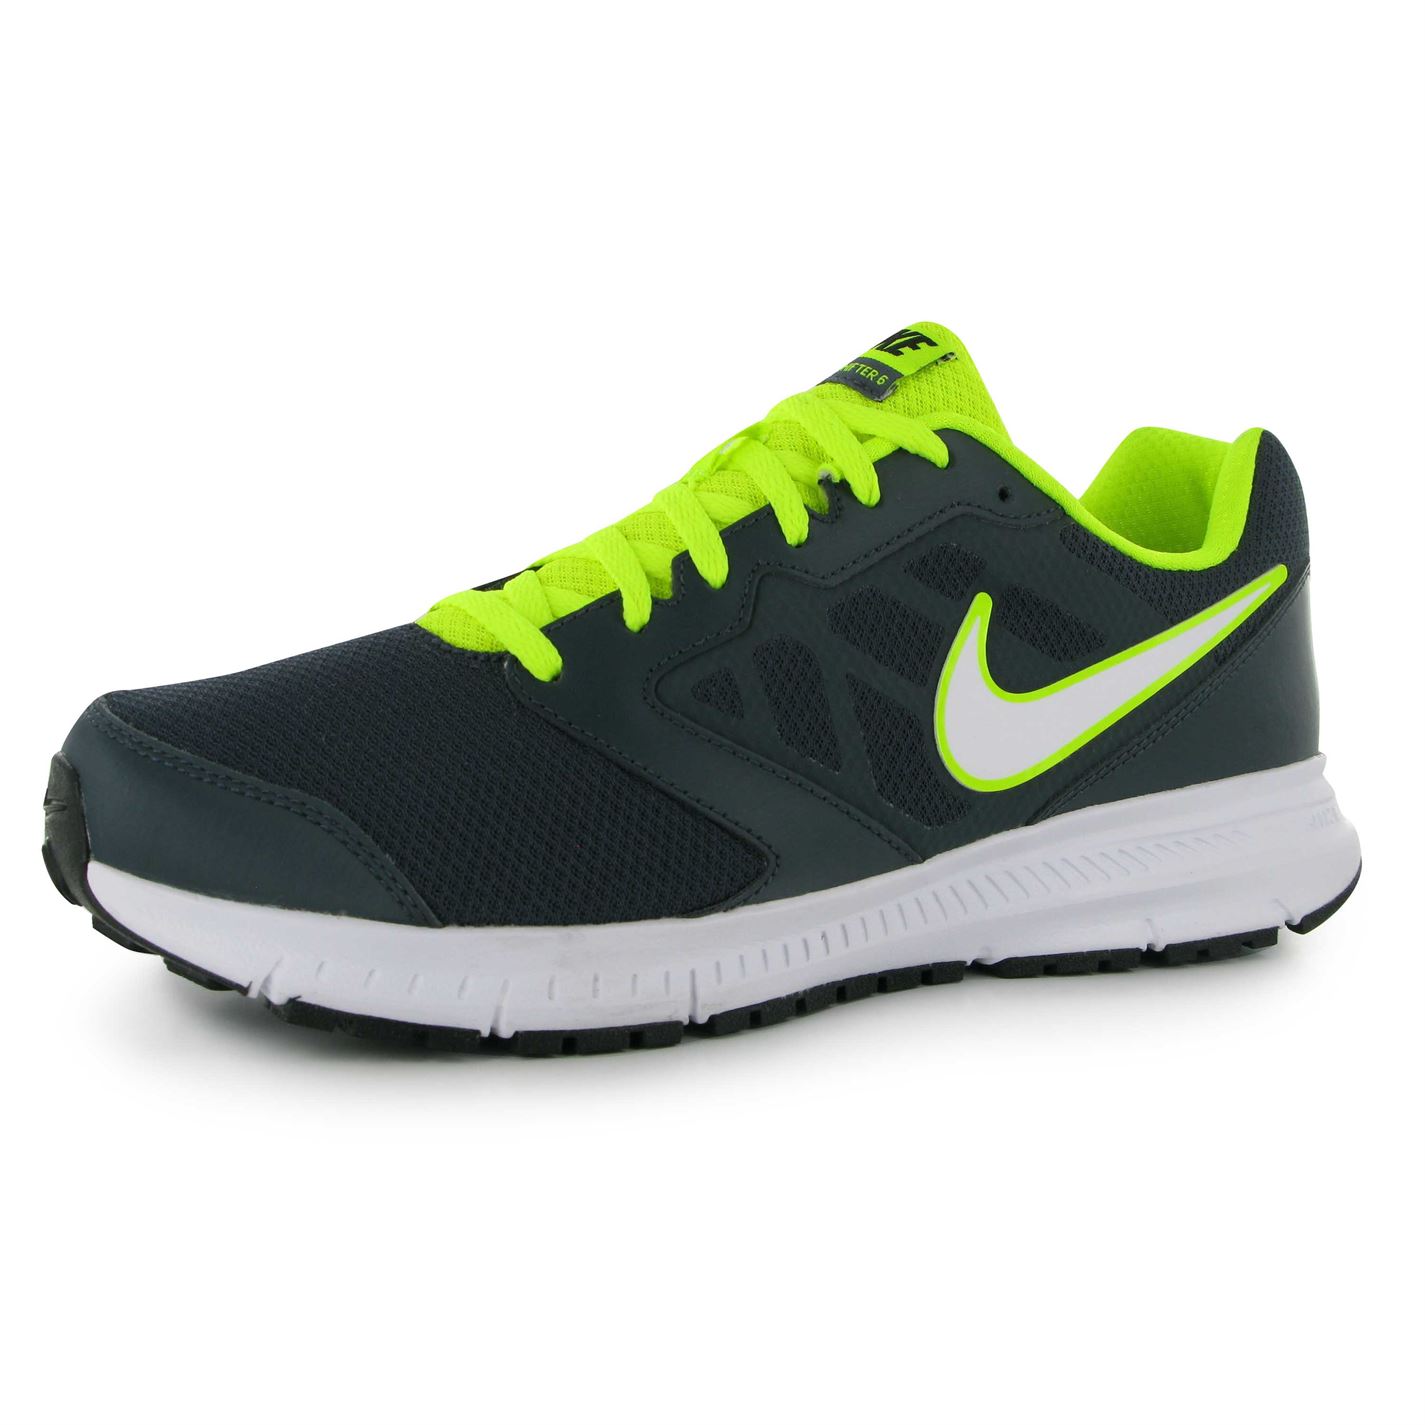 Online Coupon Island: Coupons | Coupon Code: 13 Comfy Shoes to Get With ...